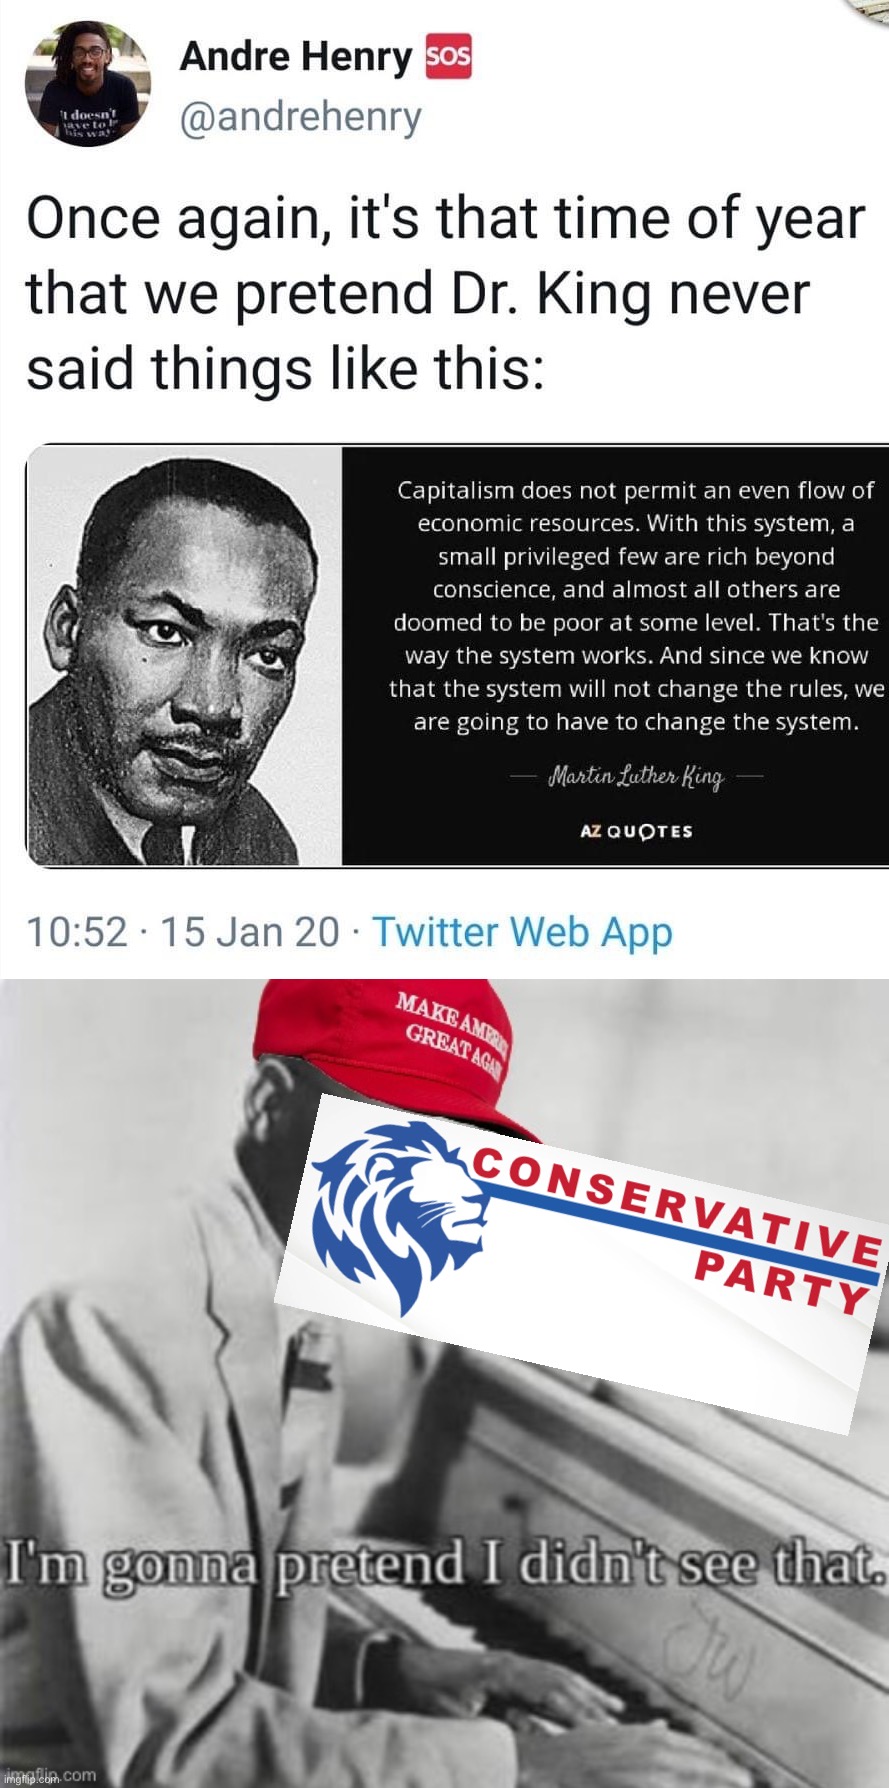 • STILL BLIND AS A BAT • | image tagged in mlk said things like this,m,l,k,said that,conservative party | made w/ Imgflip meme maker